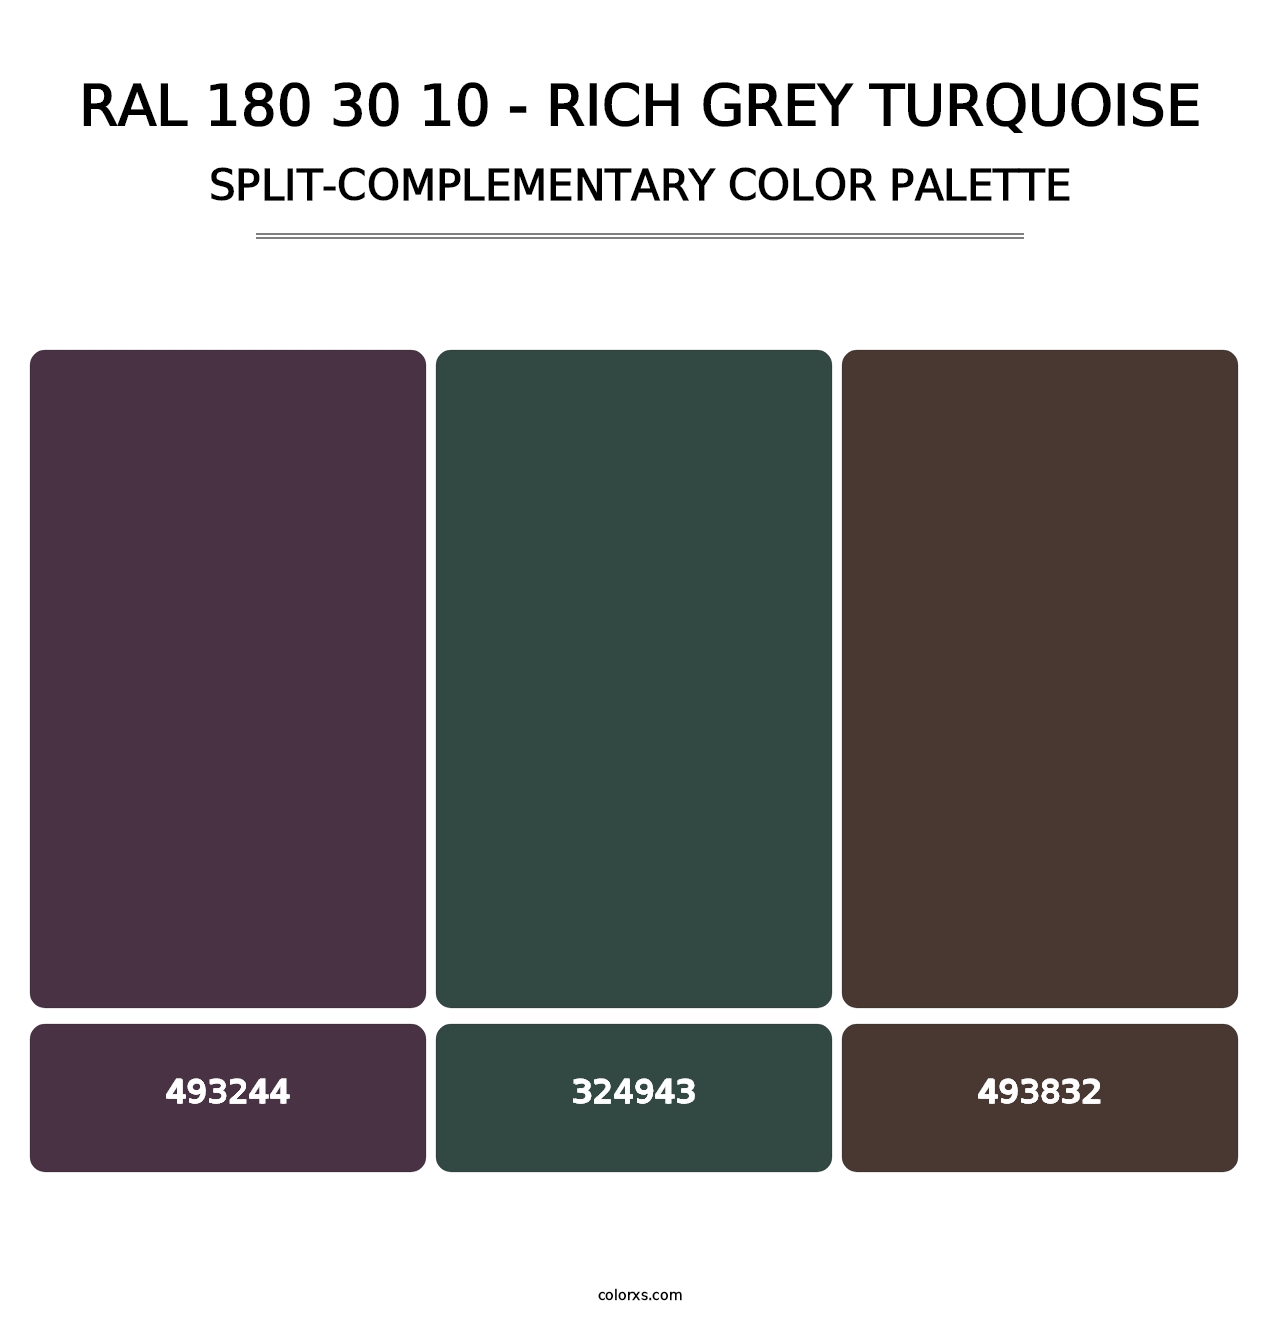 RAL 180 30 10 - Rich Grey Turquoise - Split-Complementary Color Palette